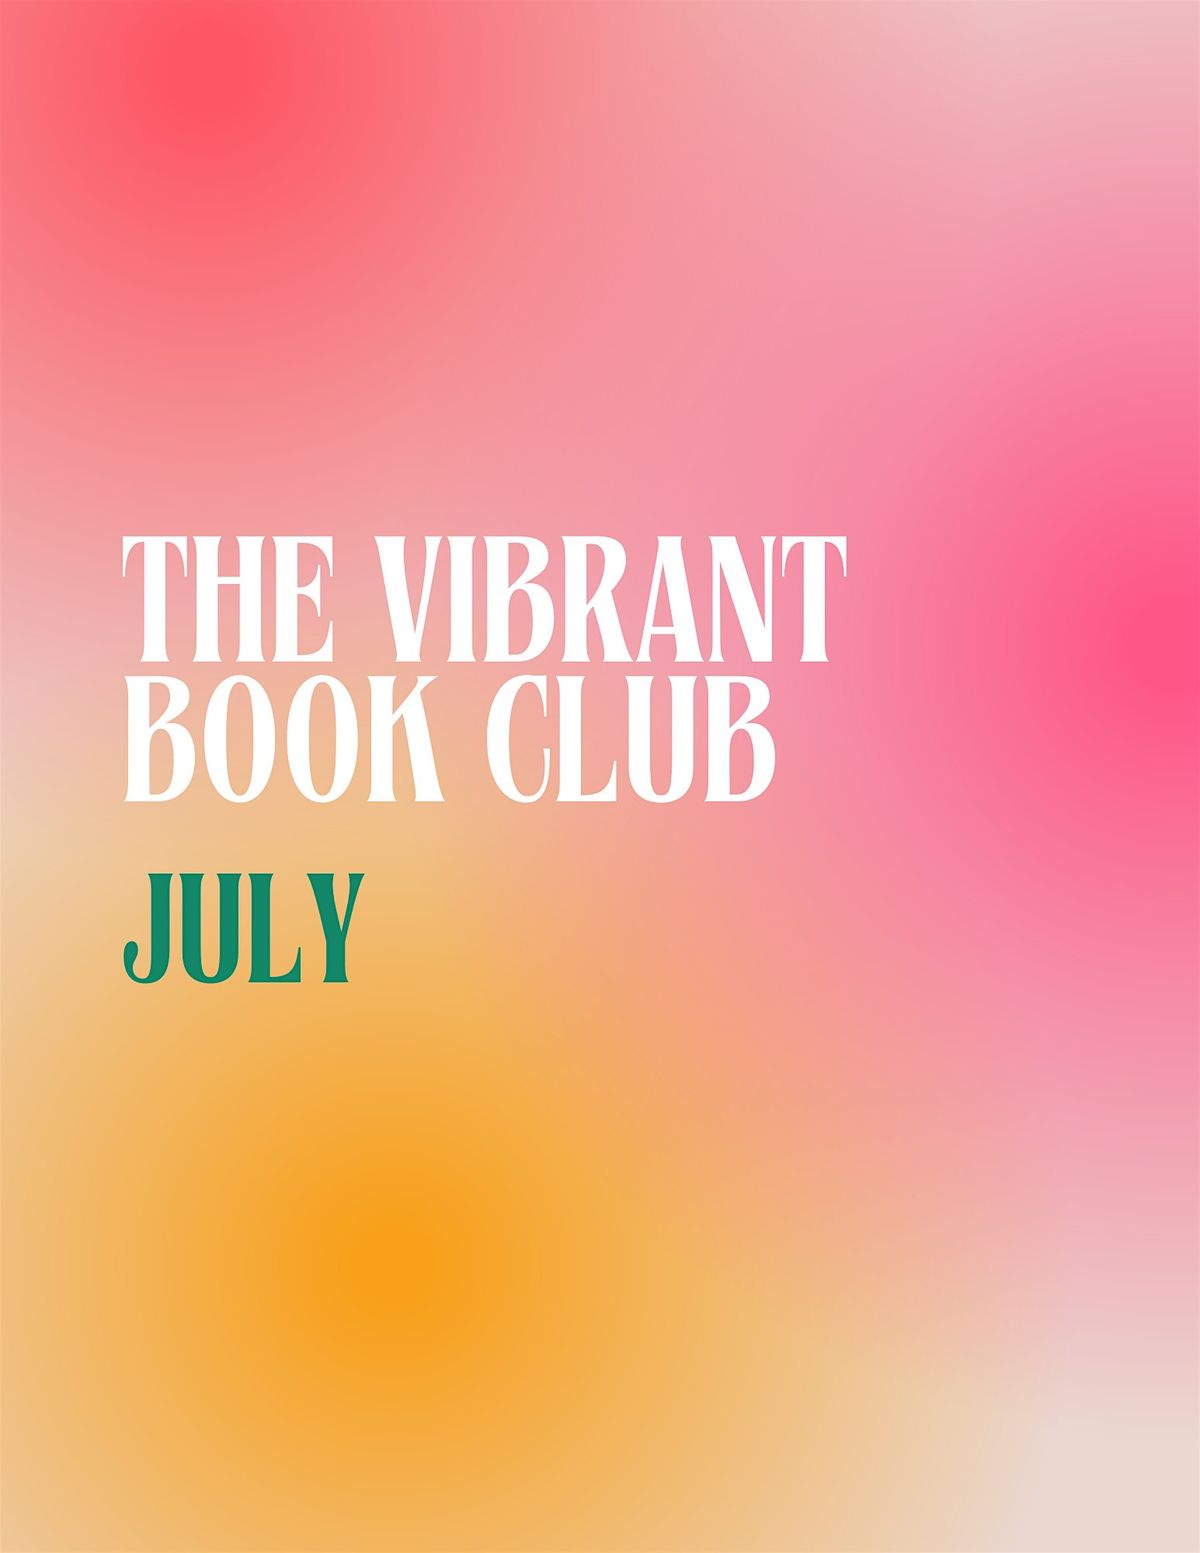 July - The Vibrant Book Club